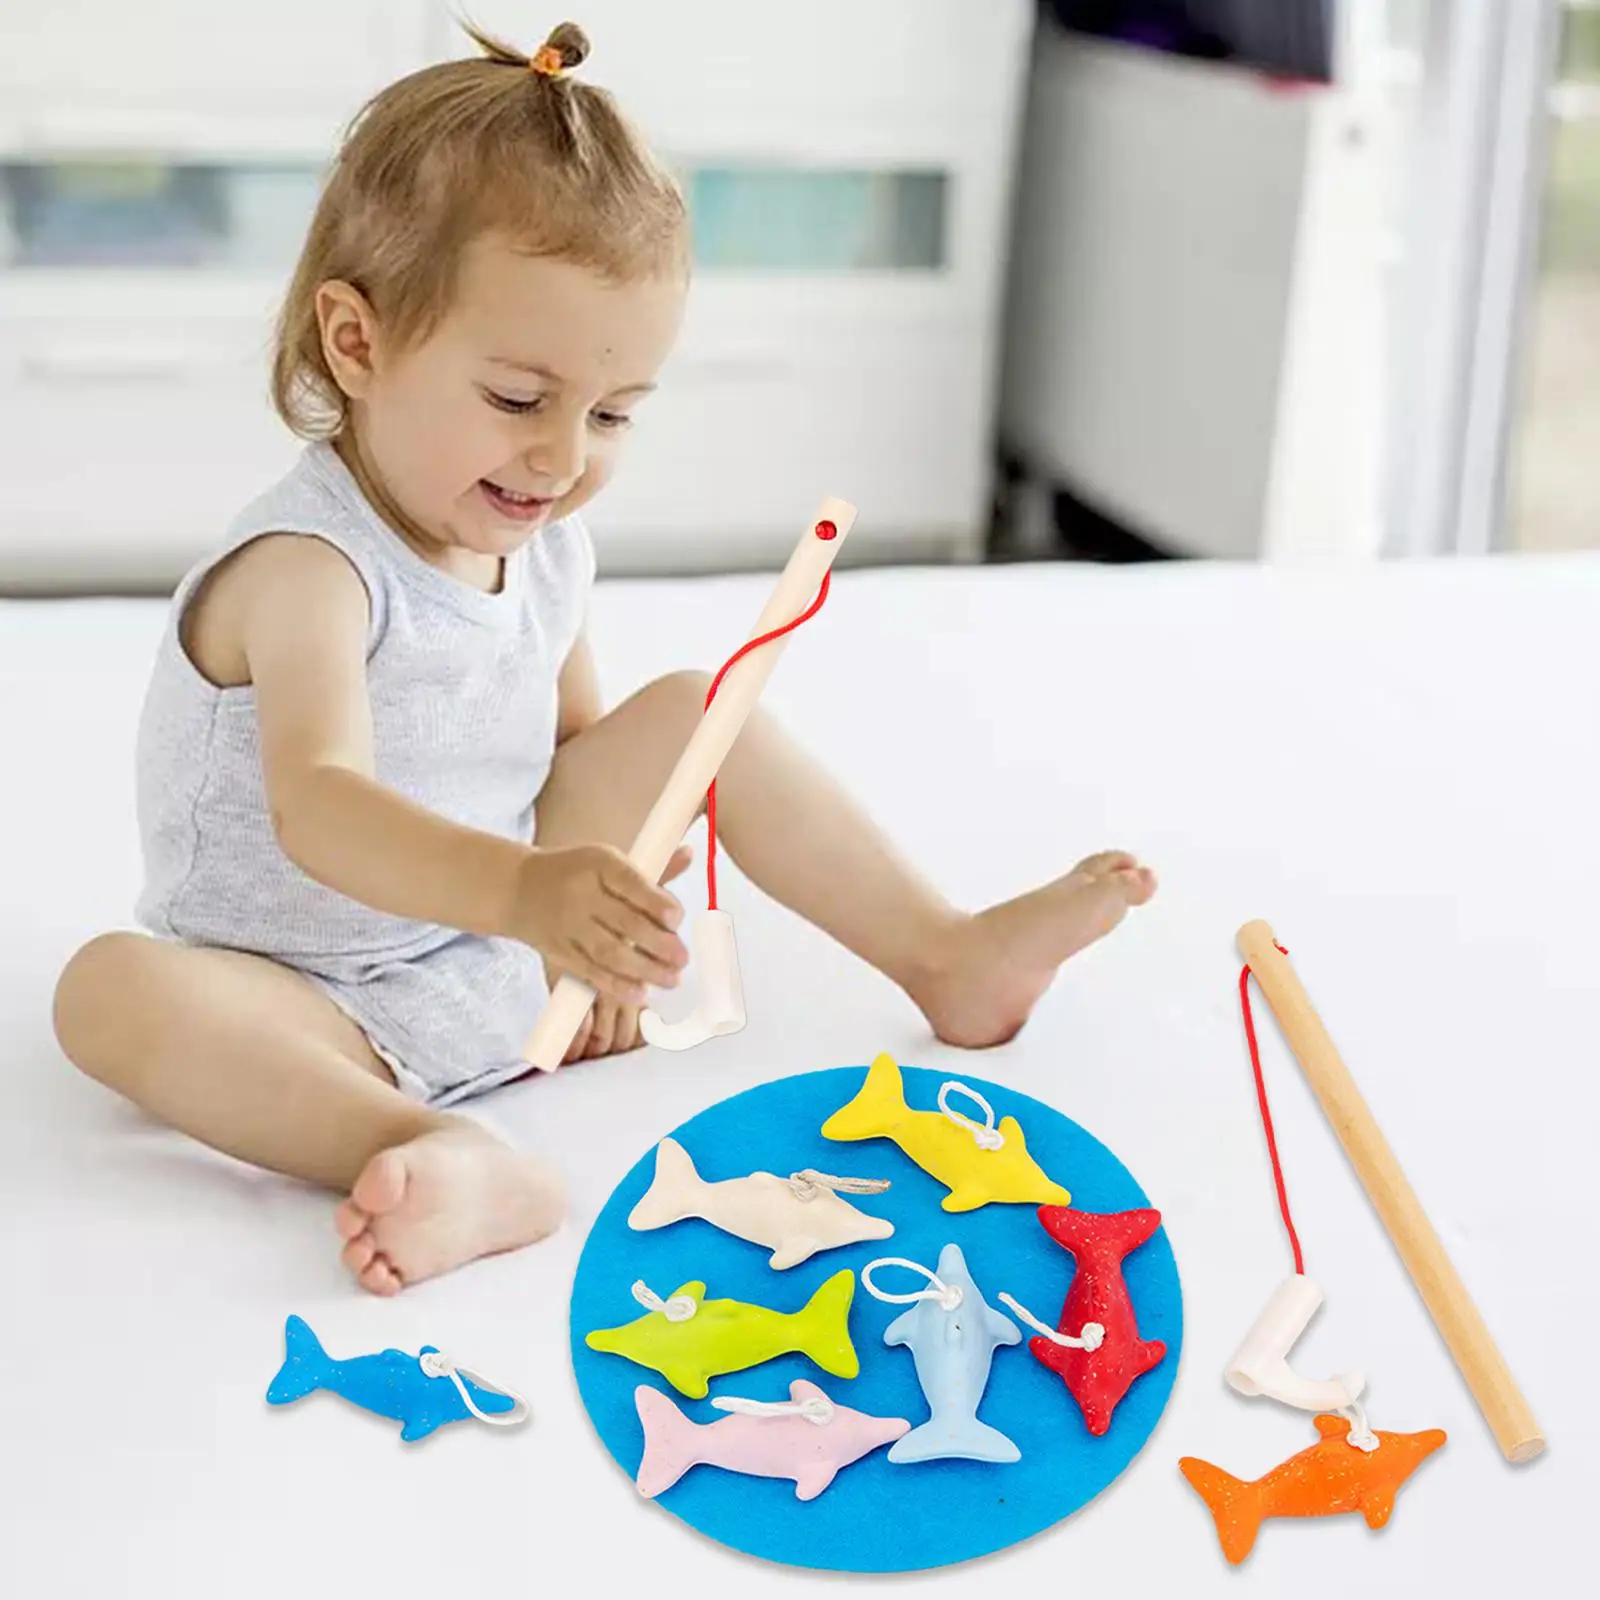 Wooden Fishing Game with Fishing Poles Catching Fish for 3+ Years Old